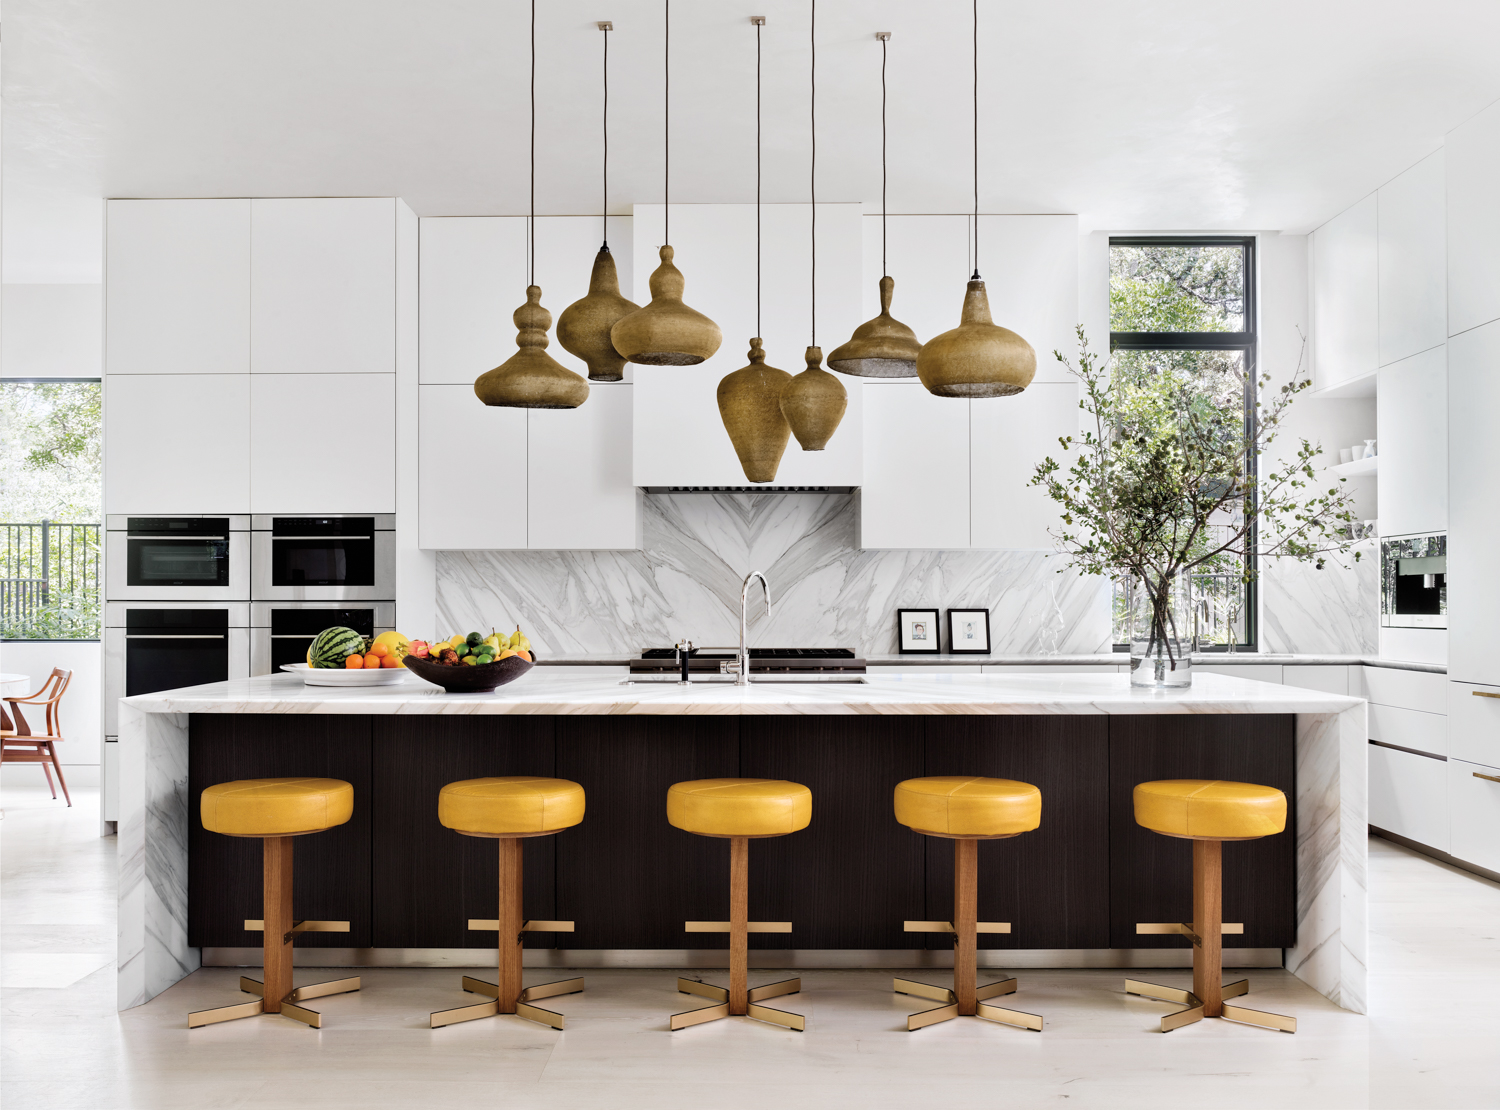 kitchen featuring pendant lighting and...